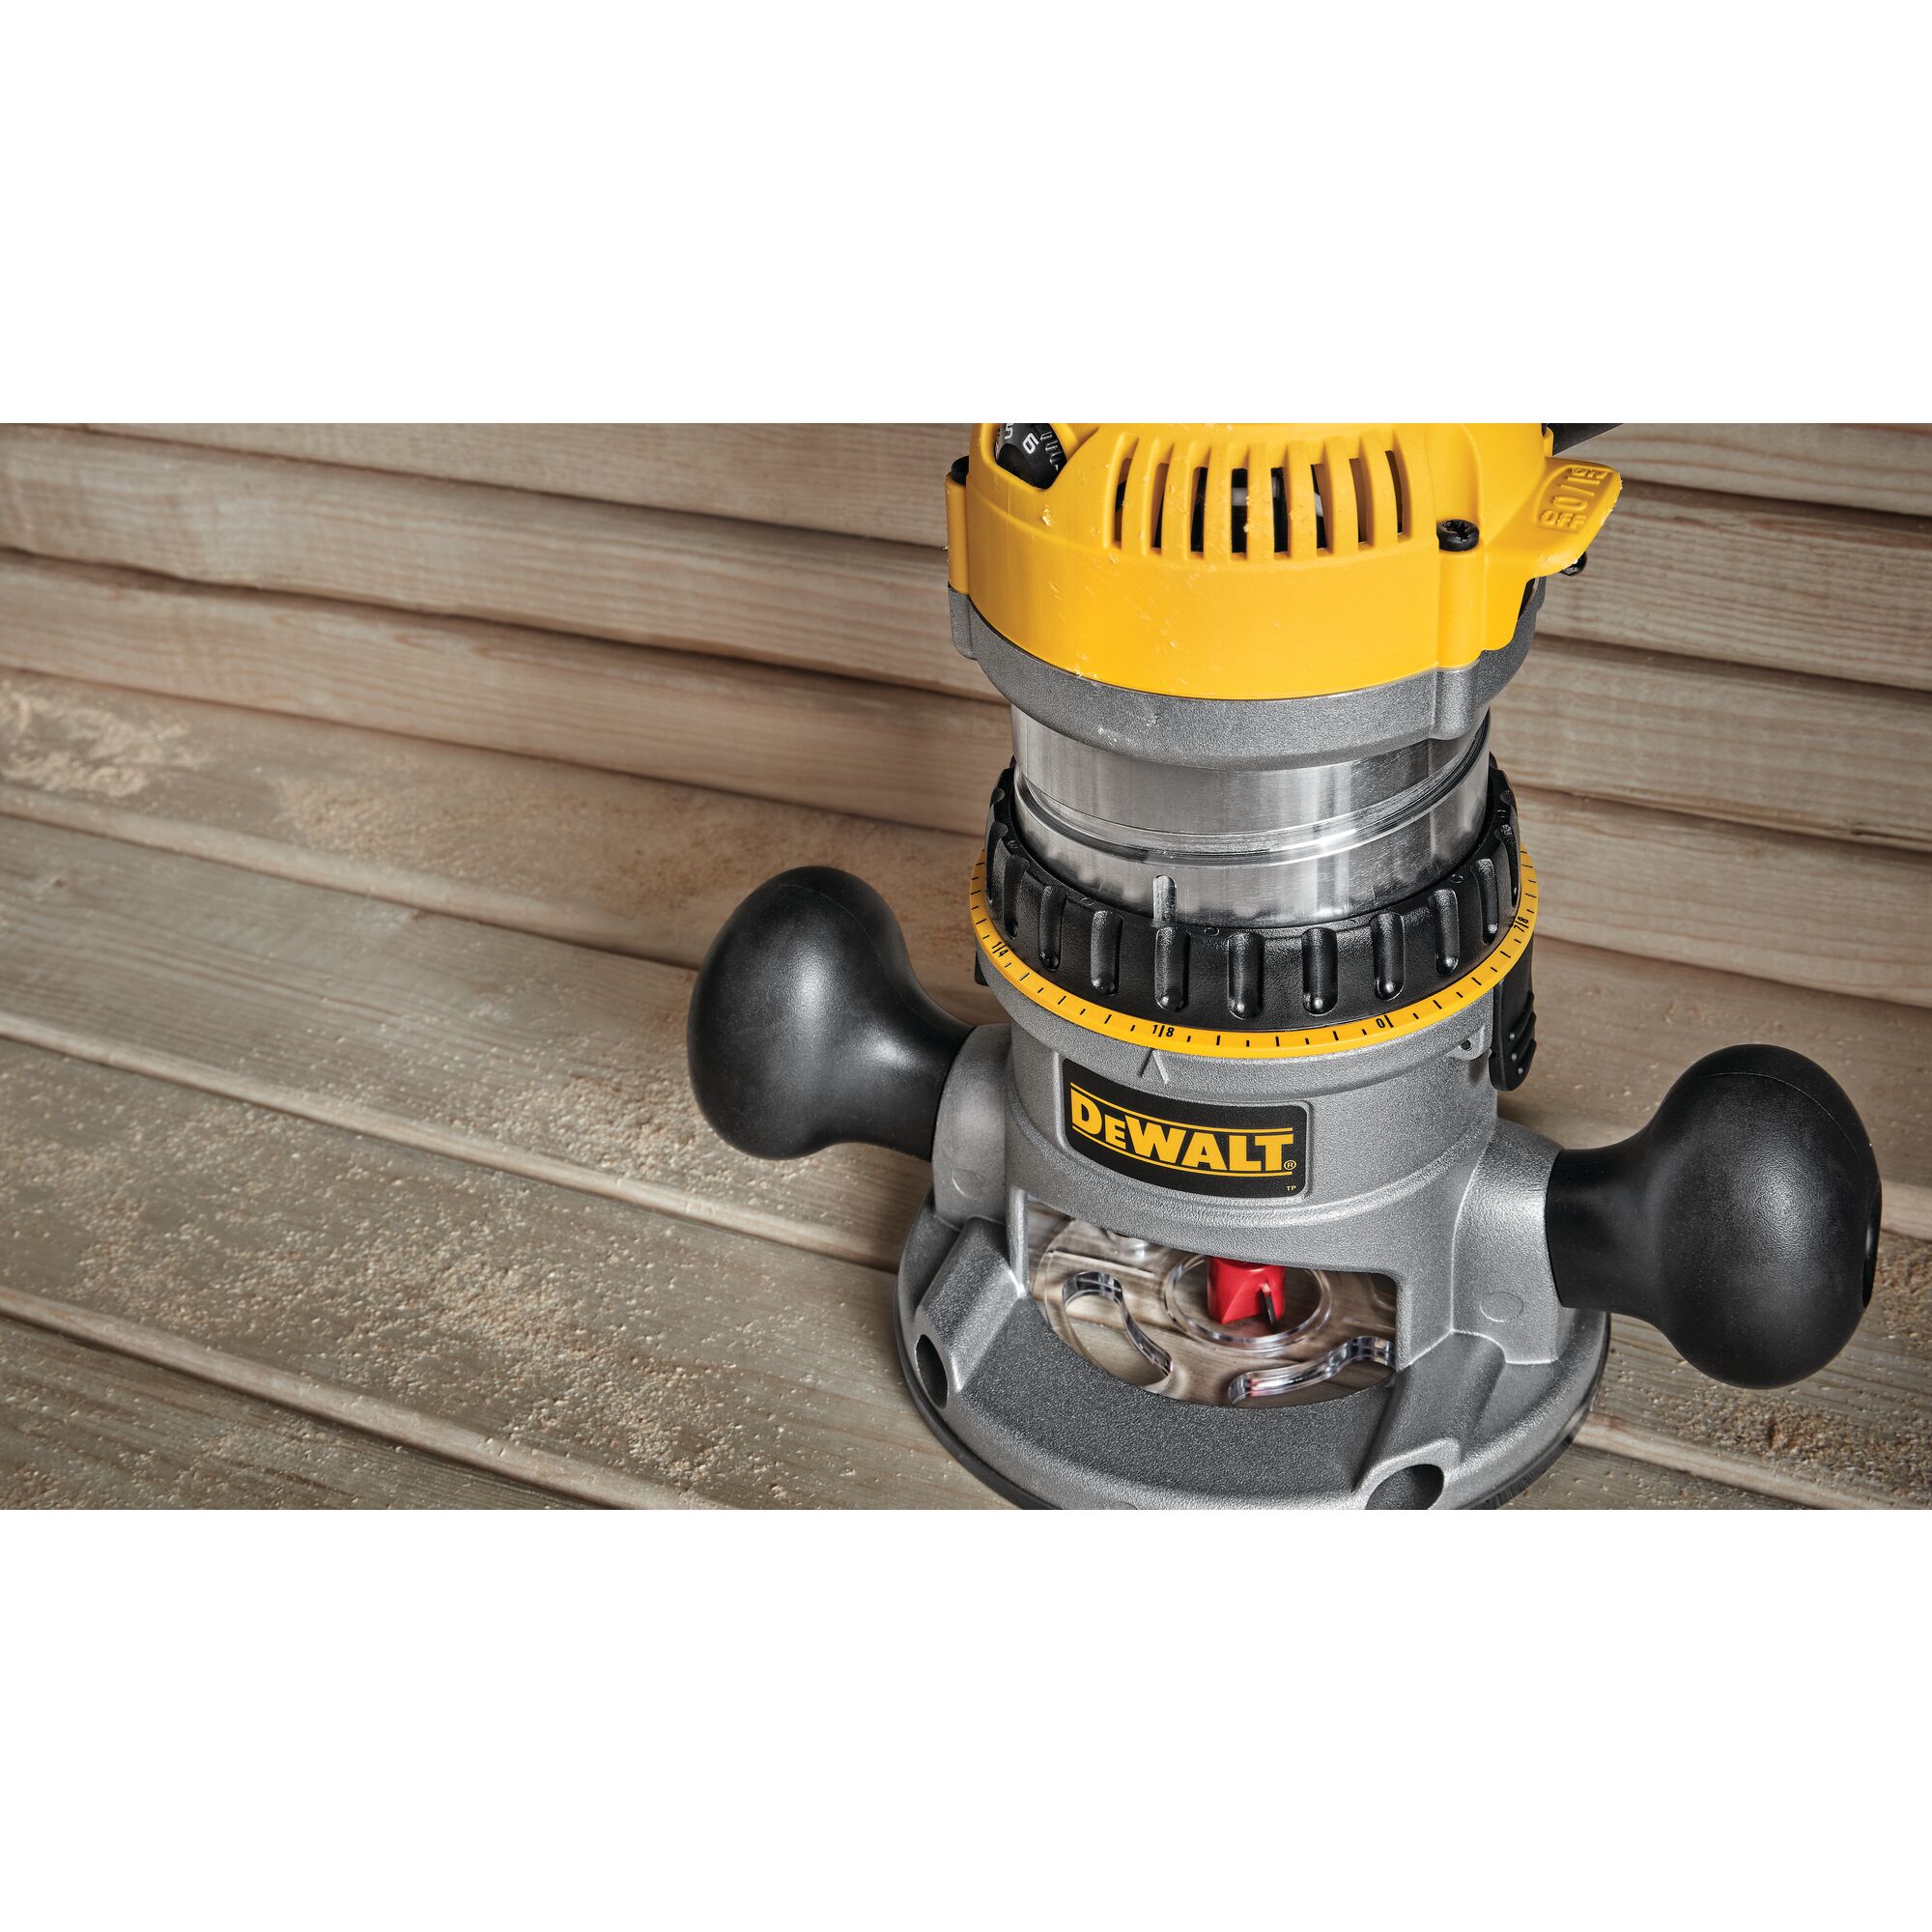 DEWALT Router, Variable Speed, Fixed Base, 2-1/4 HP (DW618K) Yellow 